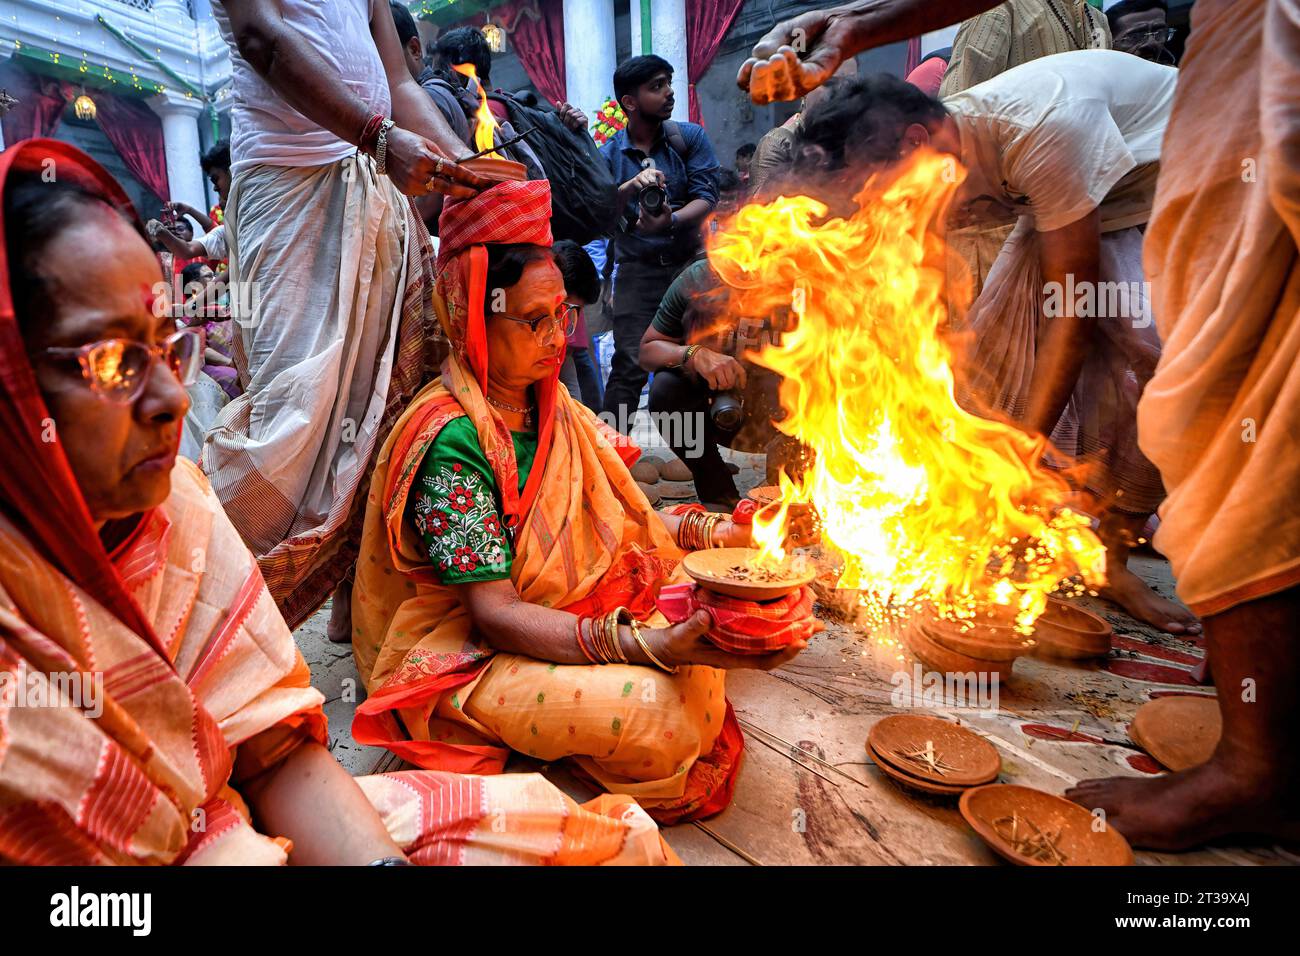 Kolkata, India. 22nd Oct, 2023. An Indian Hindu woman sits with burning fire pots on her hands and head as part of their ritual practice which includes blind faith and superstition to overcome every difficulties in coming future during the Maha ashtami celebration on the 8th day of Durga puja. Durga puja is the biggest Hindu festival running for 9 days all over India. (Photo by Avishek Das/SOPA Images/Sipa USA) Credit: Sipa USA/Alamy Live News Stock Photo